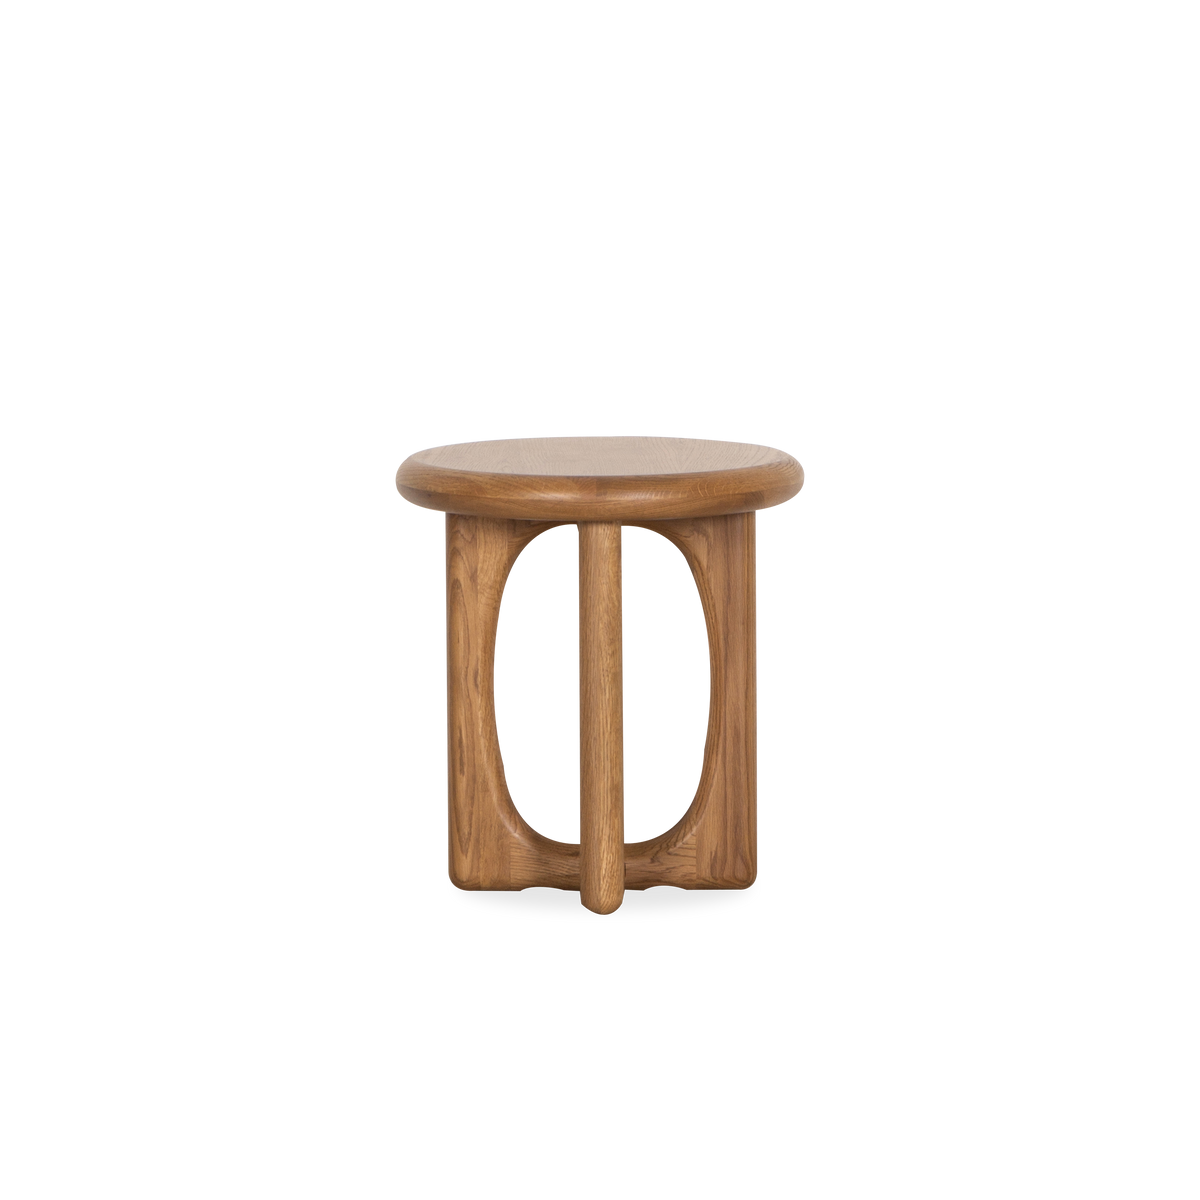 Channelling the organic forms of 1970s postmodernism, the Talon Side Table is a stylish and durable addition to any space.